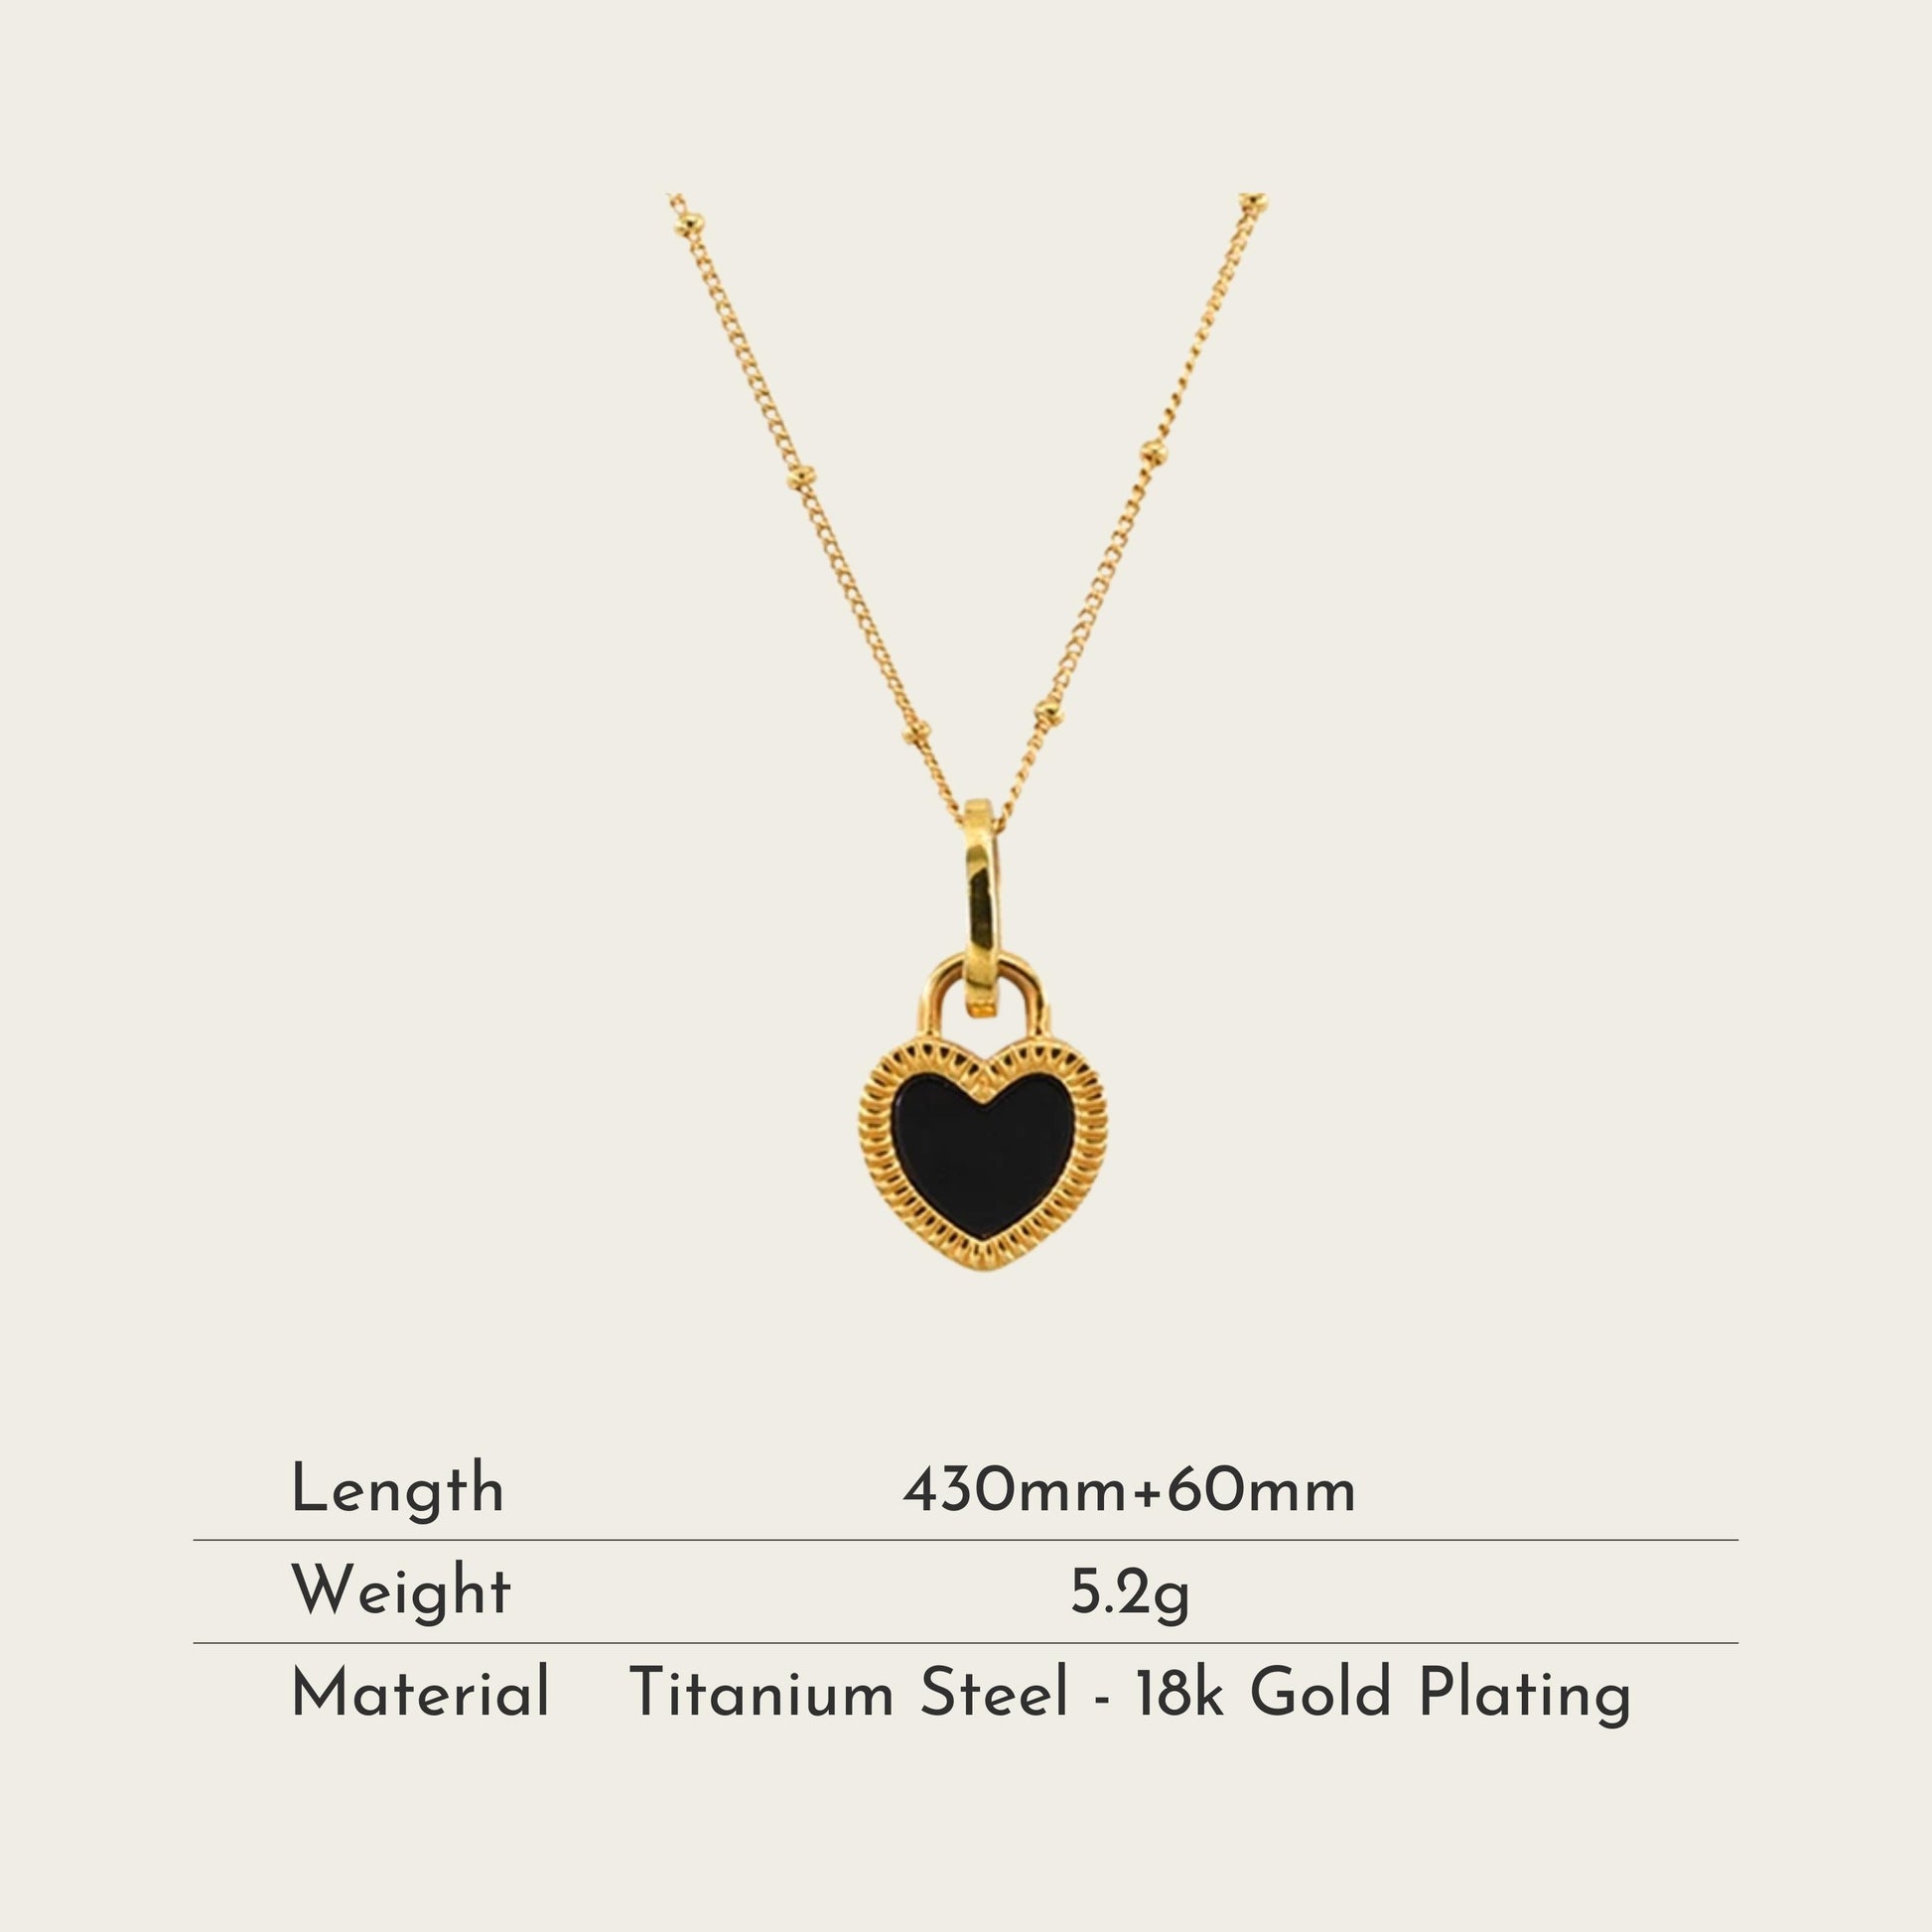 TT300044 Sajewell Titanium Steel Double Sided Black and White Heart Necklace